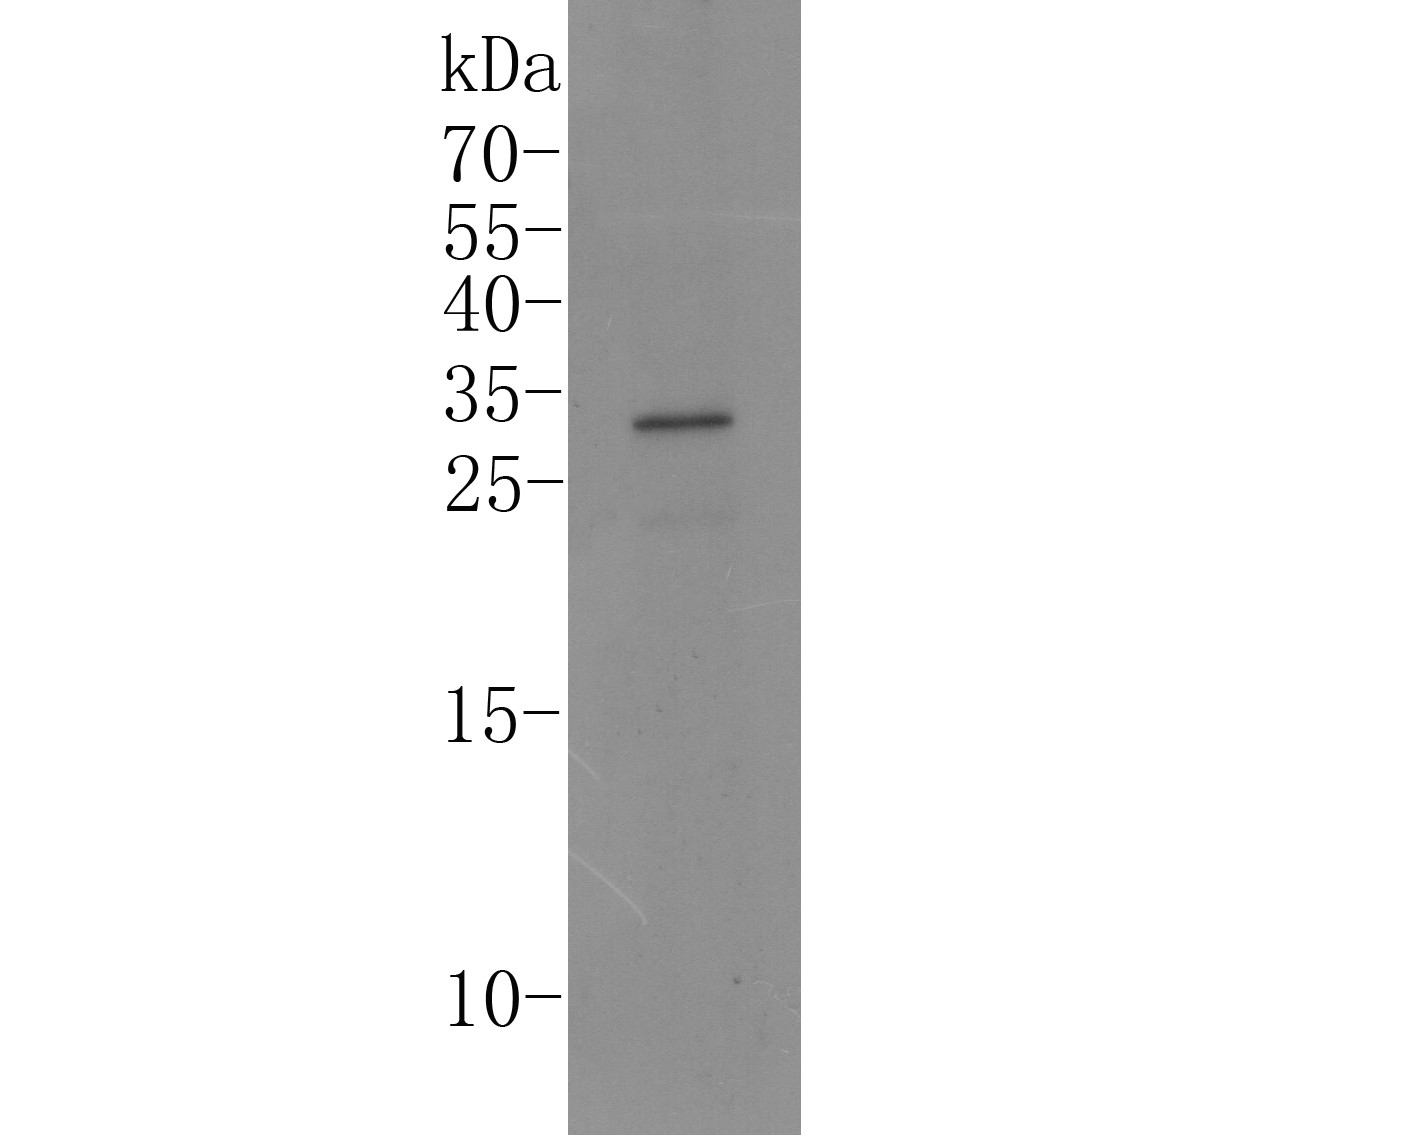 Western blot analysis of IL17A on Human skeletal muscle tissue lysate. Proteins were transferred to a PVDF membrane and blocked with 5% BSA in PBS for 1 hour at room temperature. The primary antibody (ER1902-37, 1/500) was used in 5% BSA at room temperature for 2 hours. Goat Anti-Rabbit IgG - HRP Secondary Antibody (HA1001) at 1:5,000 dilution was used for 1 hour at room temperature.